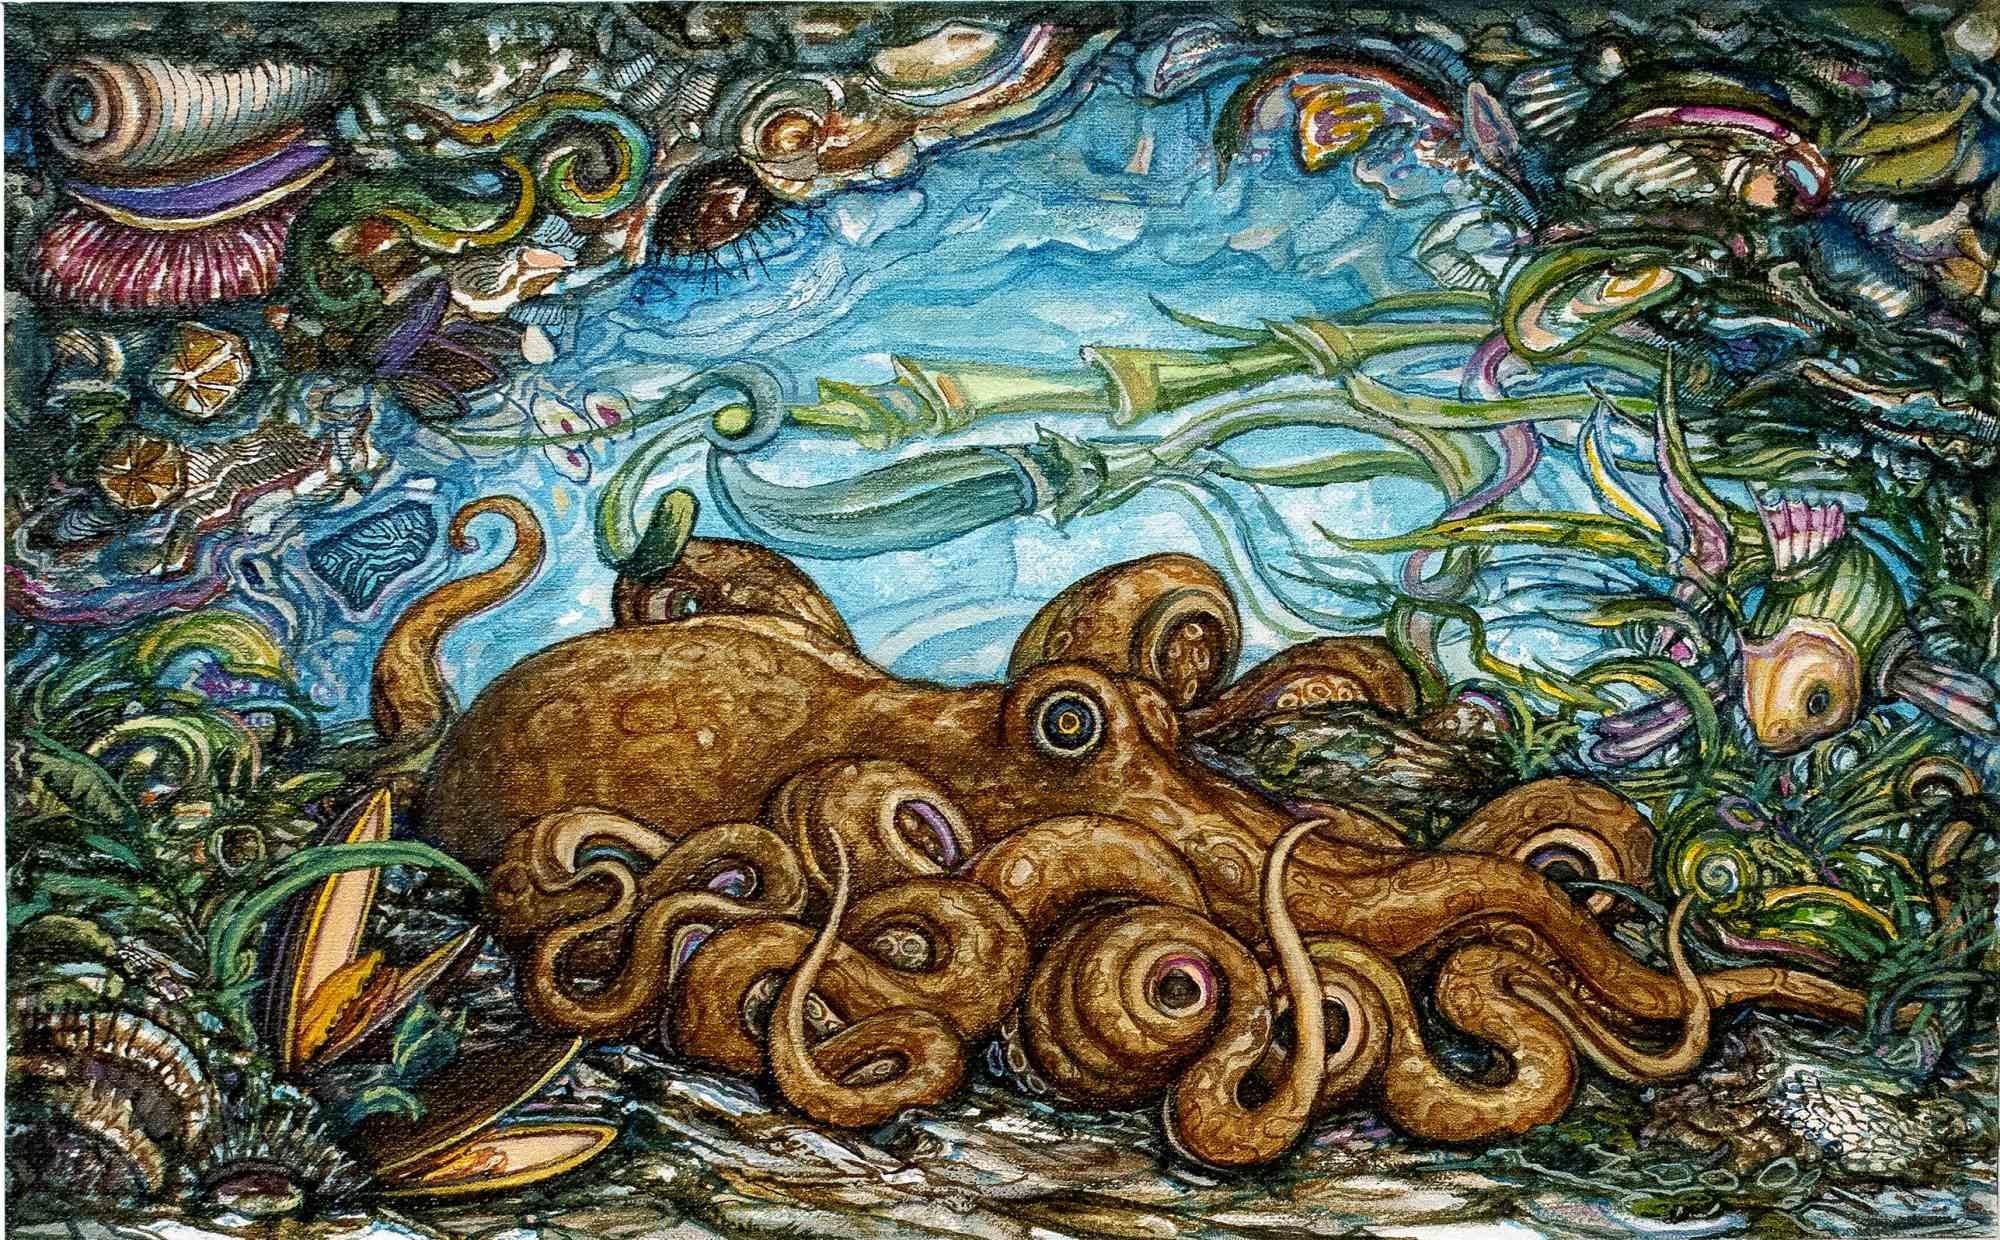 Octopus - Oil Paint by Adriano Pompa - 2019